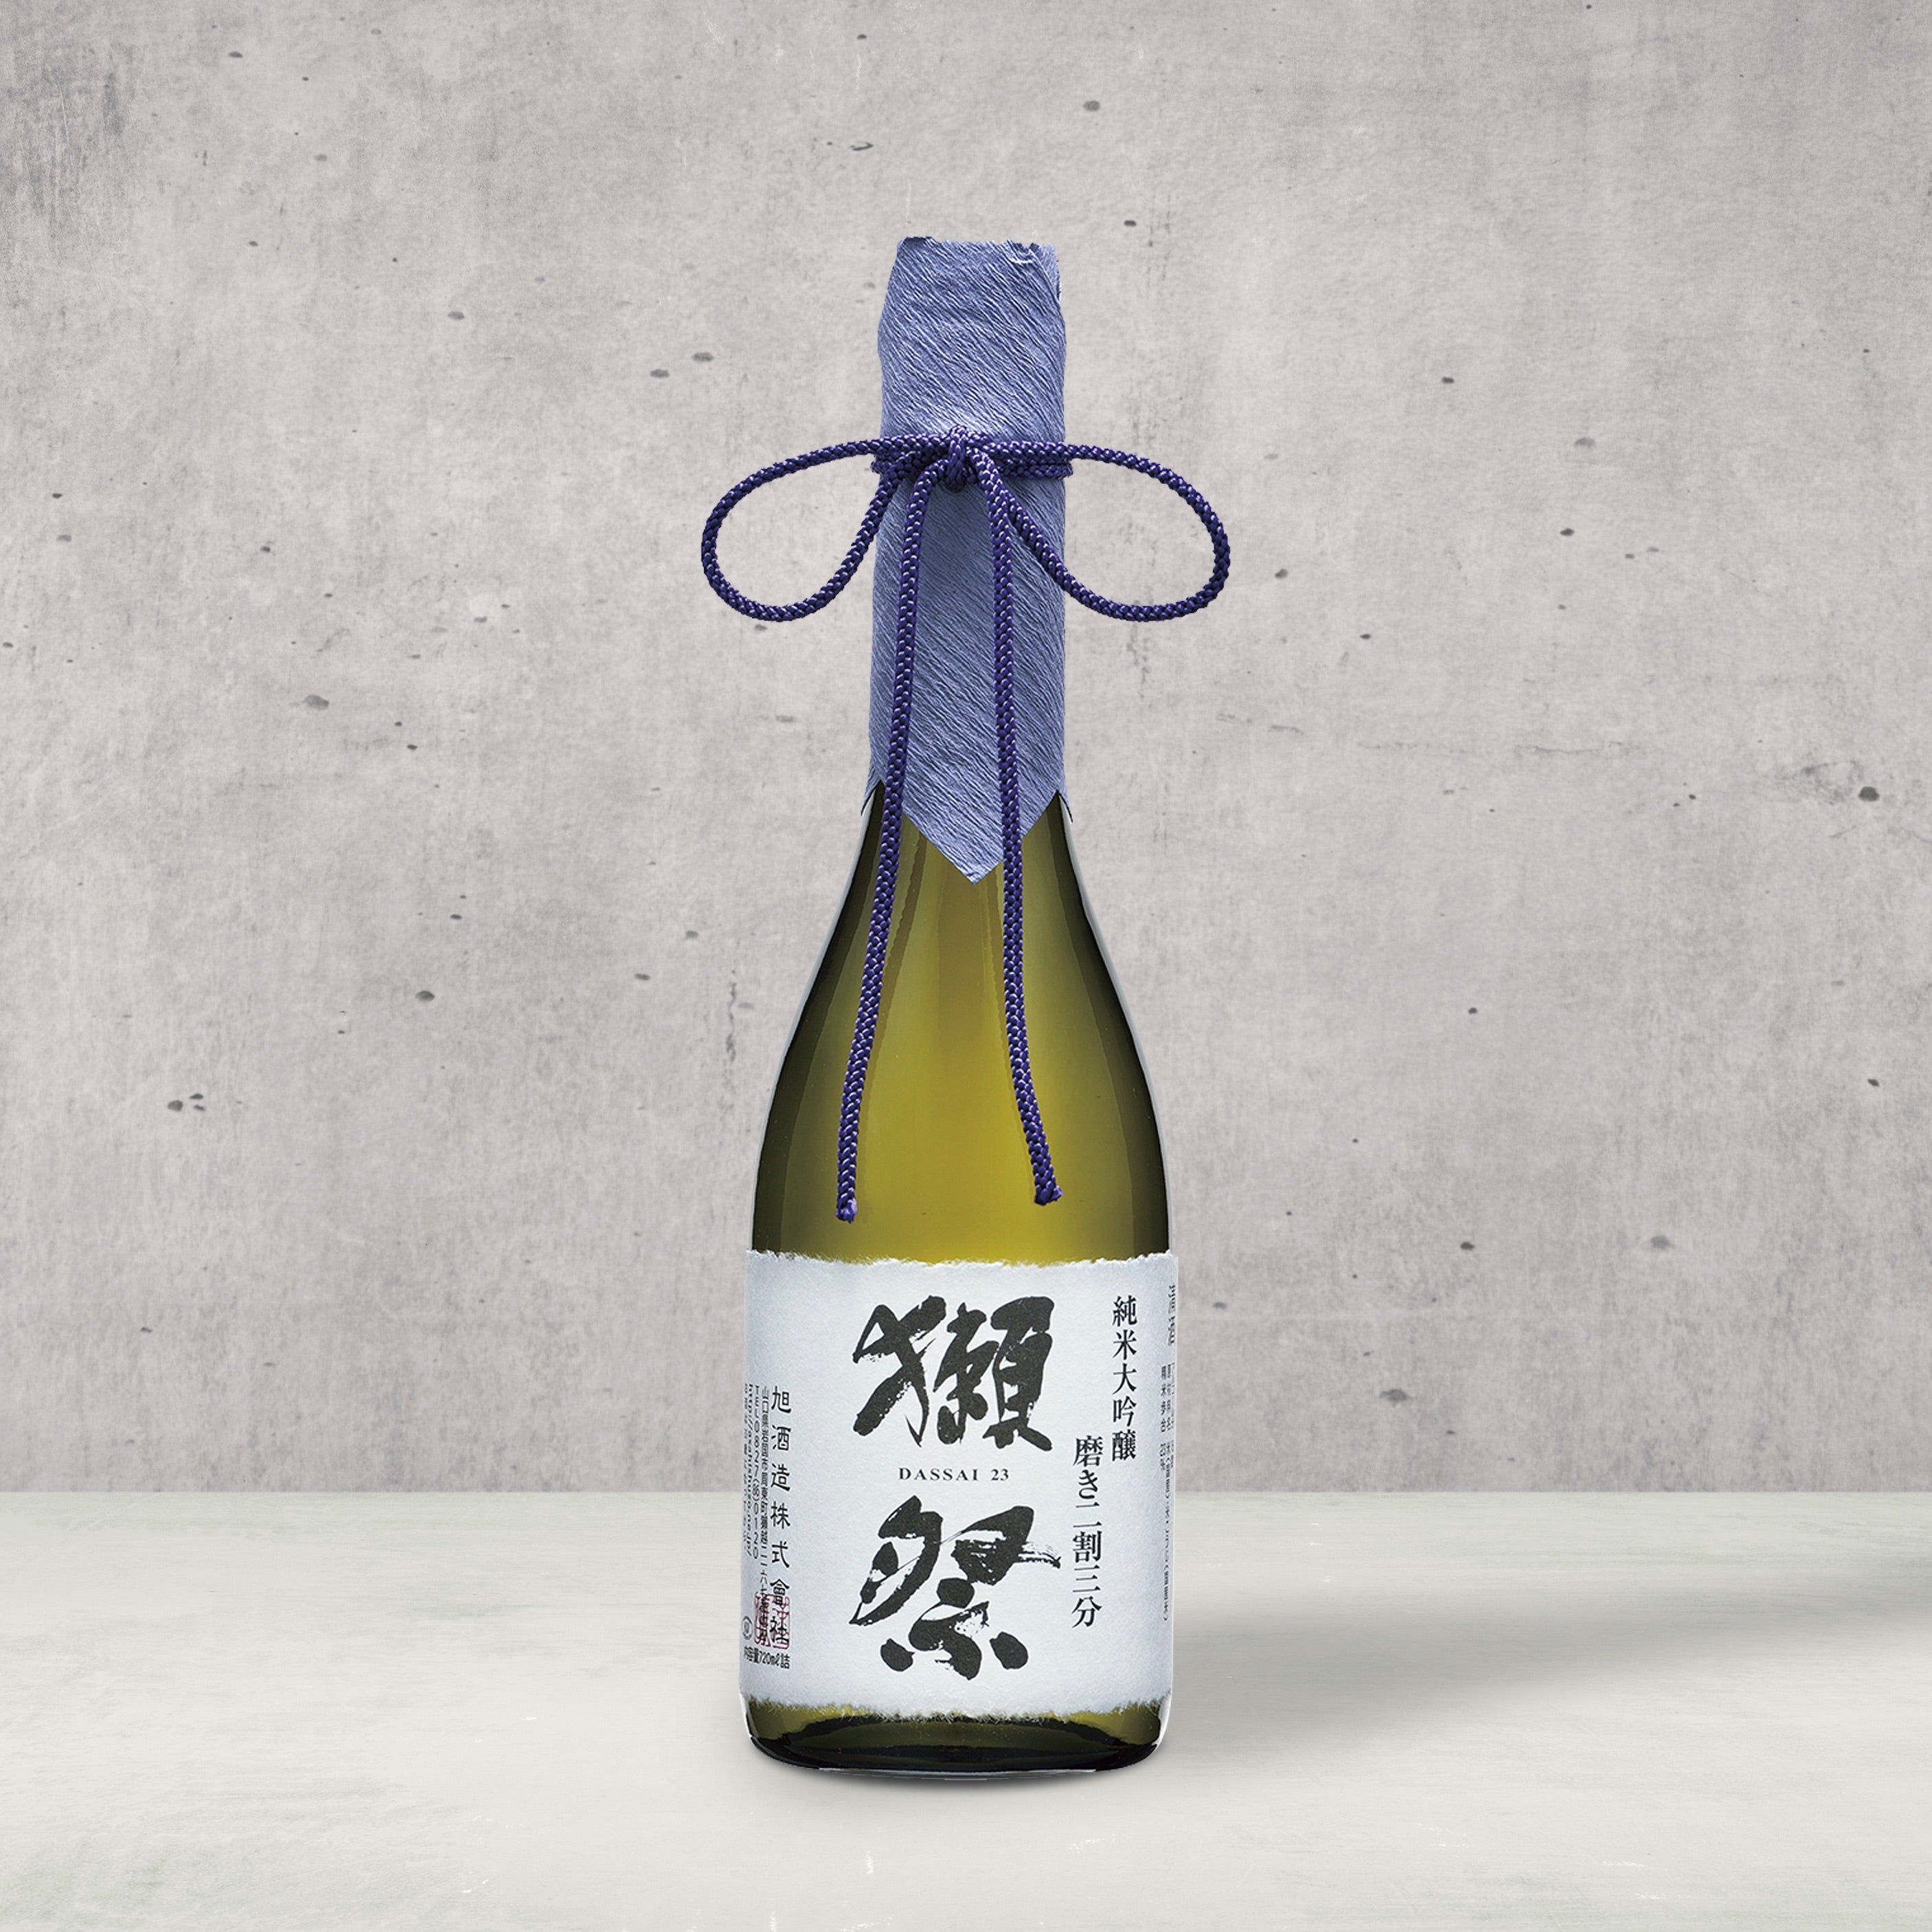 Dassai 23 Sake. Dassai 23, To craft the ultimate Junmai Daiginjo sake Dassai 23, Yamada-Nishiki rice is first polished down to 23%. It's polished 24 hours a day for 7 days straight—that's 168 hours spent on polishing! Shop Japanese sake online.